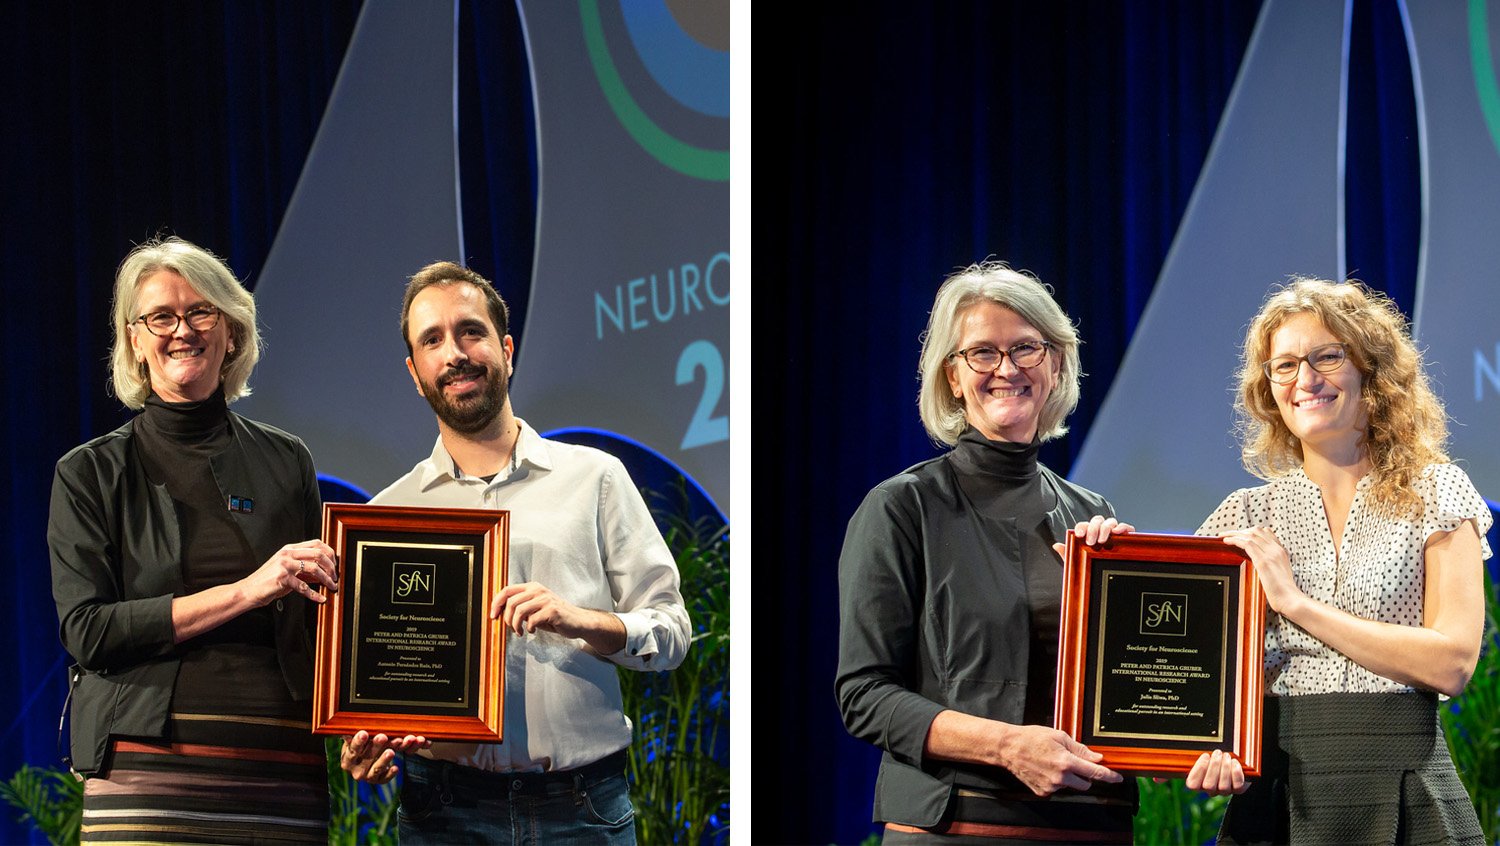 Antonio Fernández Ruiz, PhD (left), of the New York University Medical Center, and Julia Sliwa, PhD (right), of The Rockefeller University, accept the Peter and Patricia Gruber International Research Award.